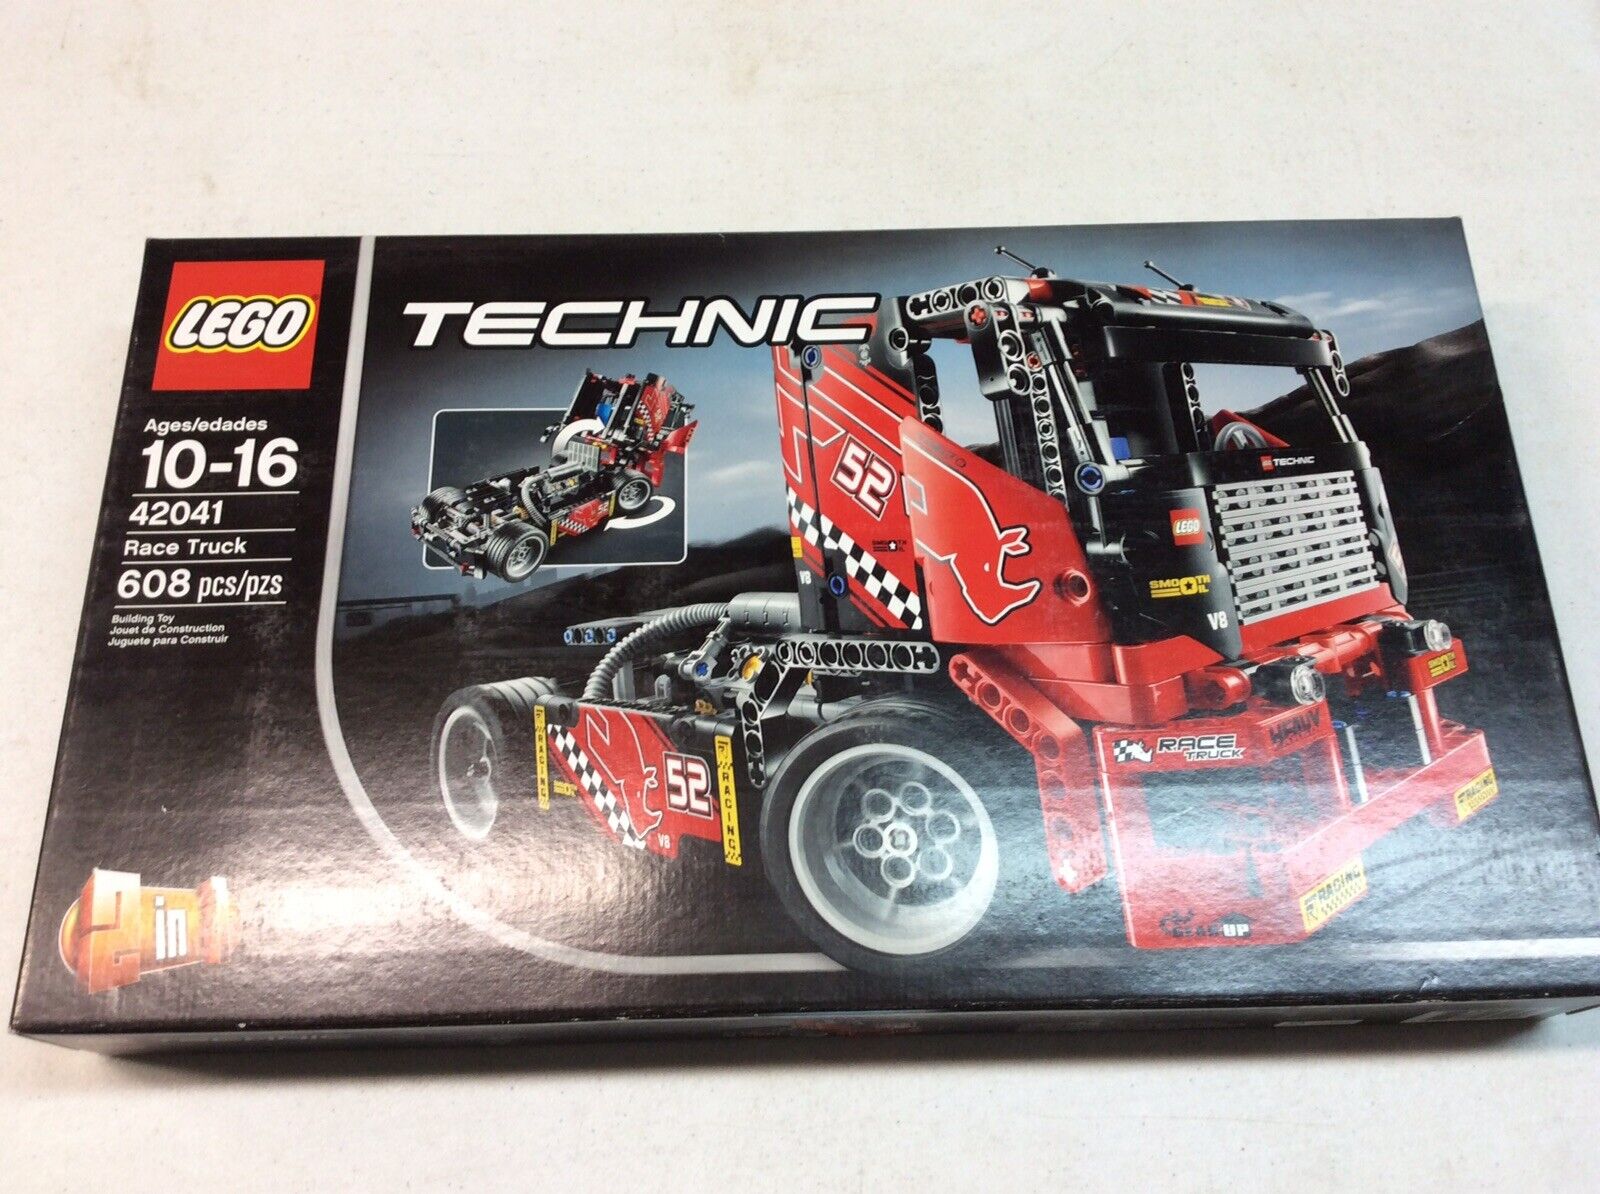 LEGO Set 42041 Technic Race Truck Brand New In Factory Sealed Box